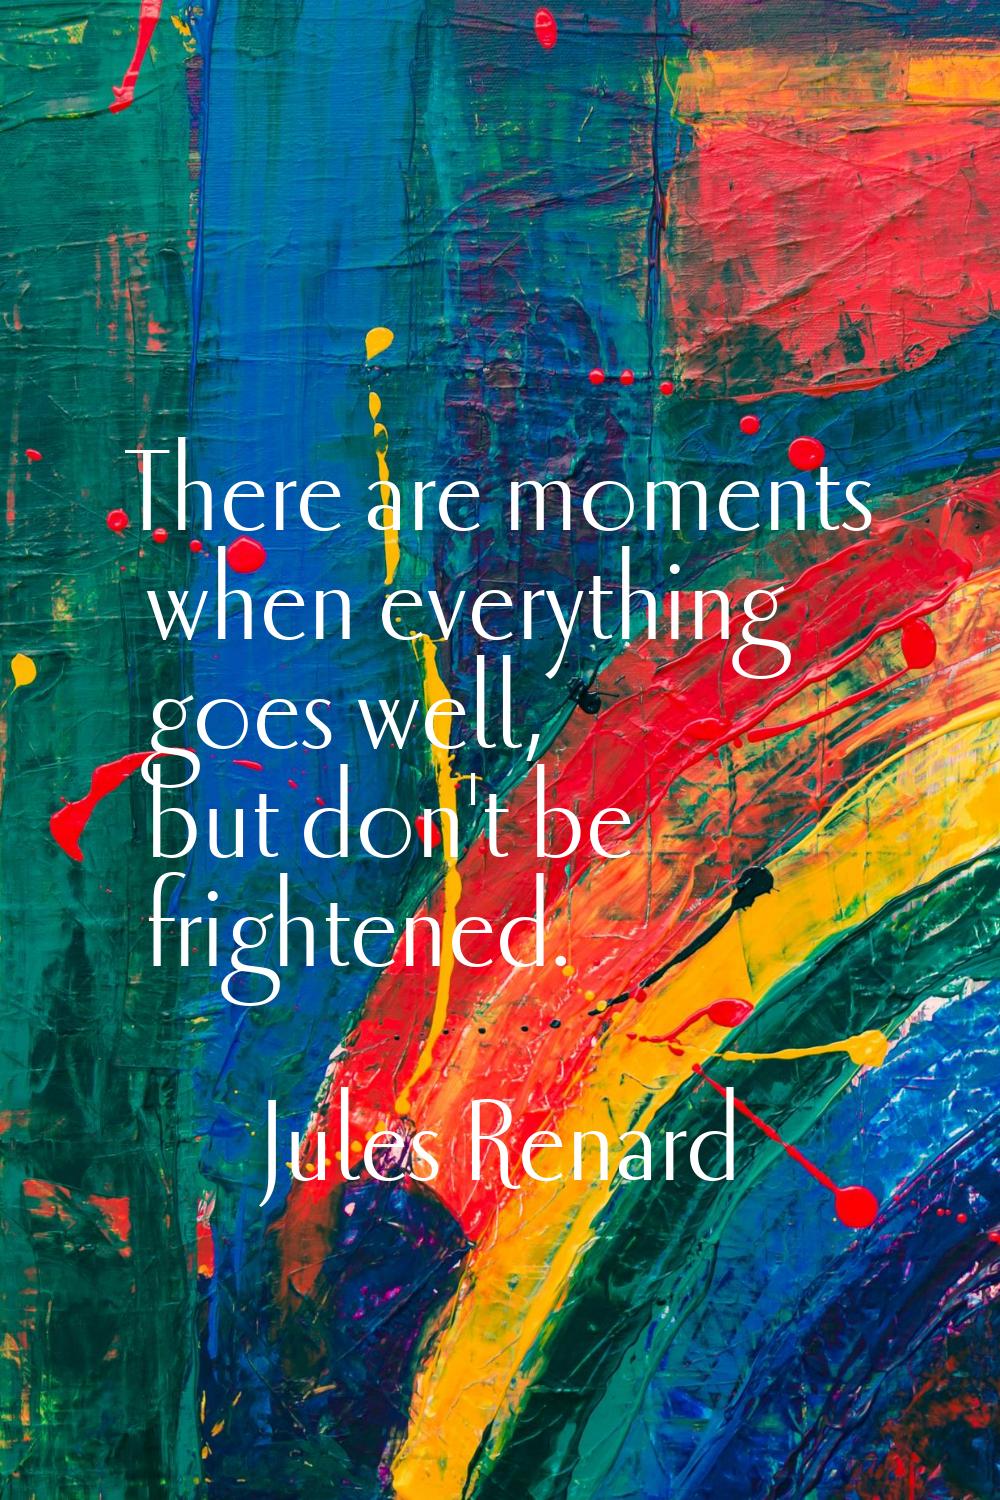 There are moments when everything goes well, but don't be frightened.